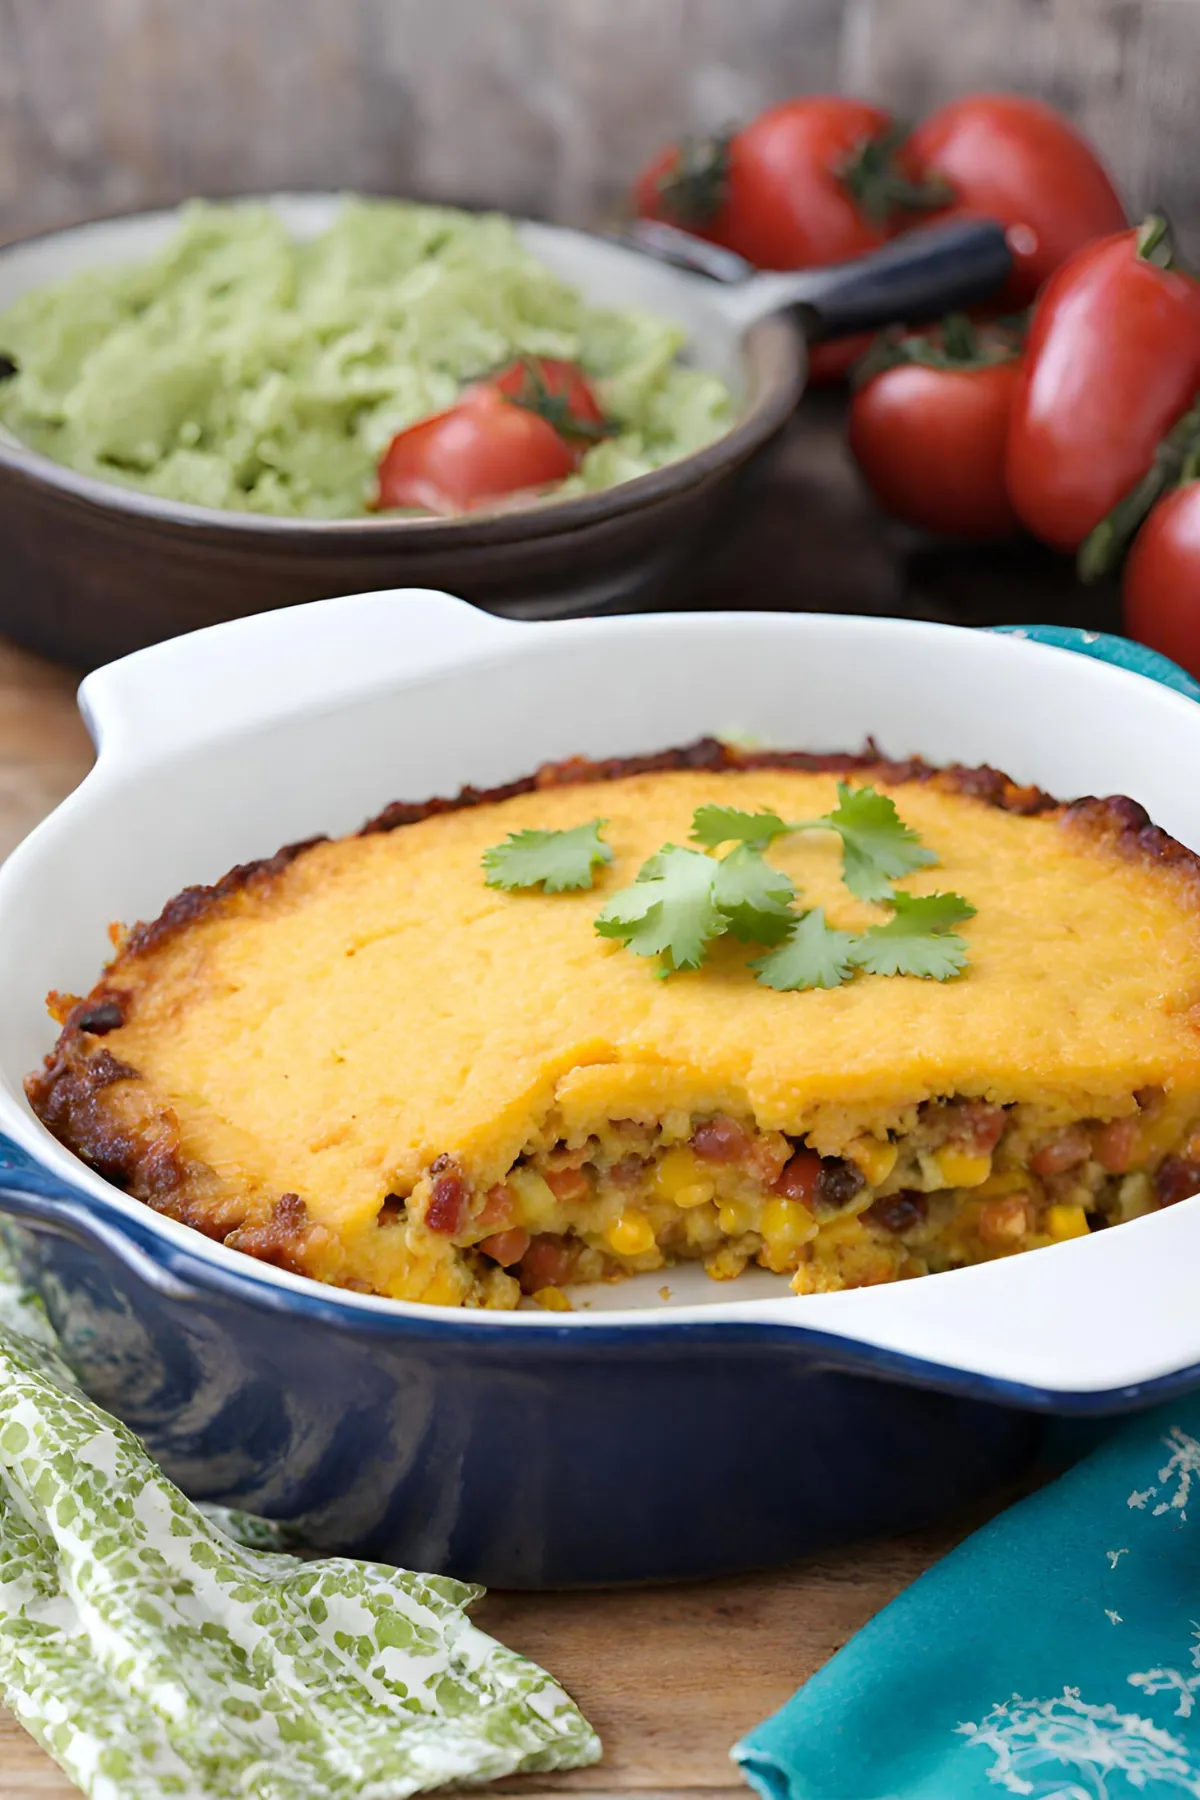 Cooking Instructions for Mexican Cornbread Casserole